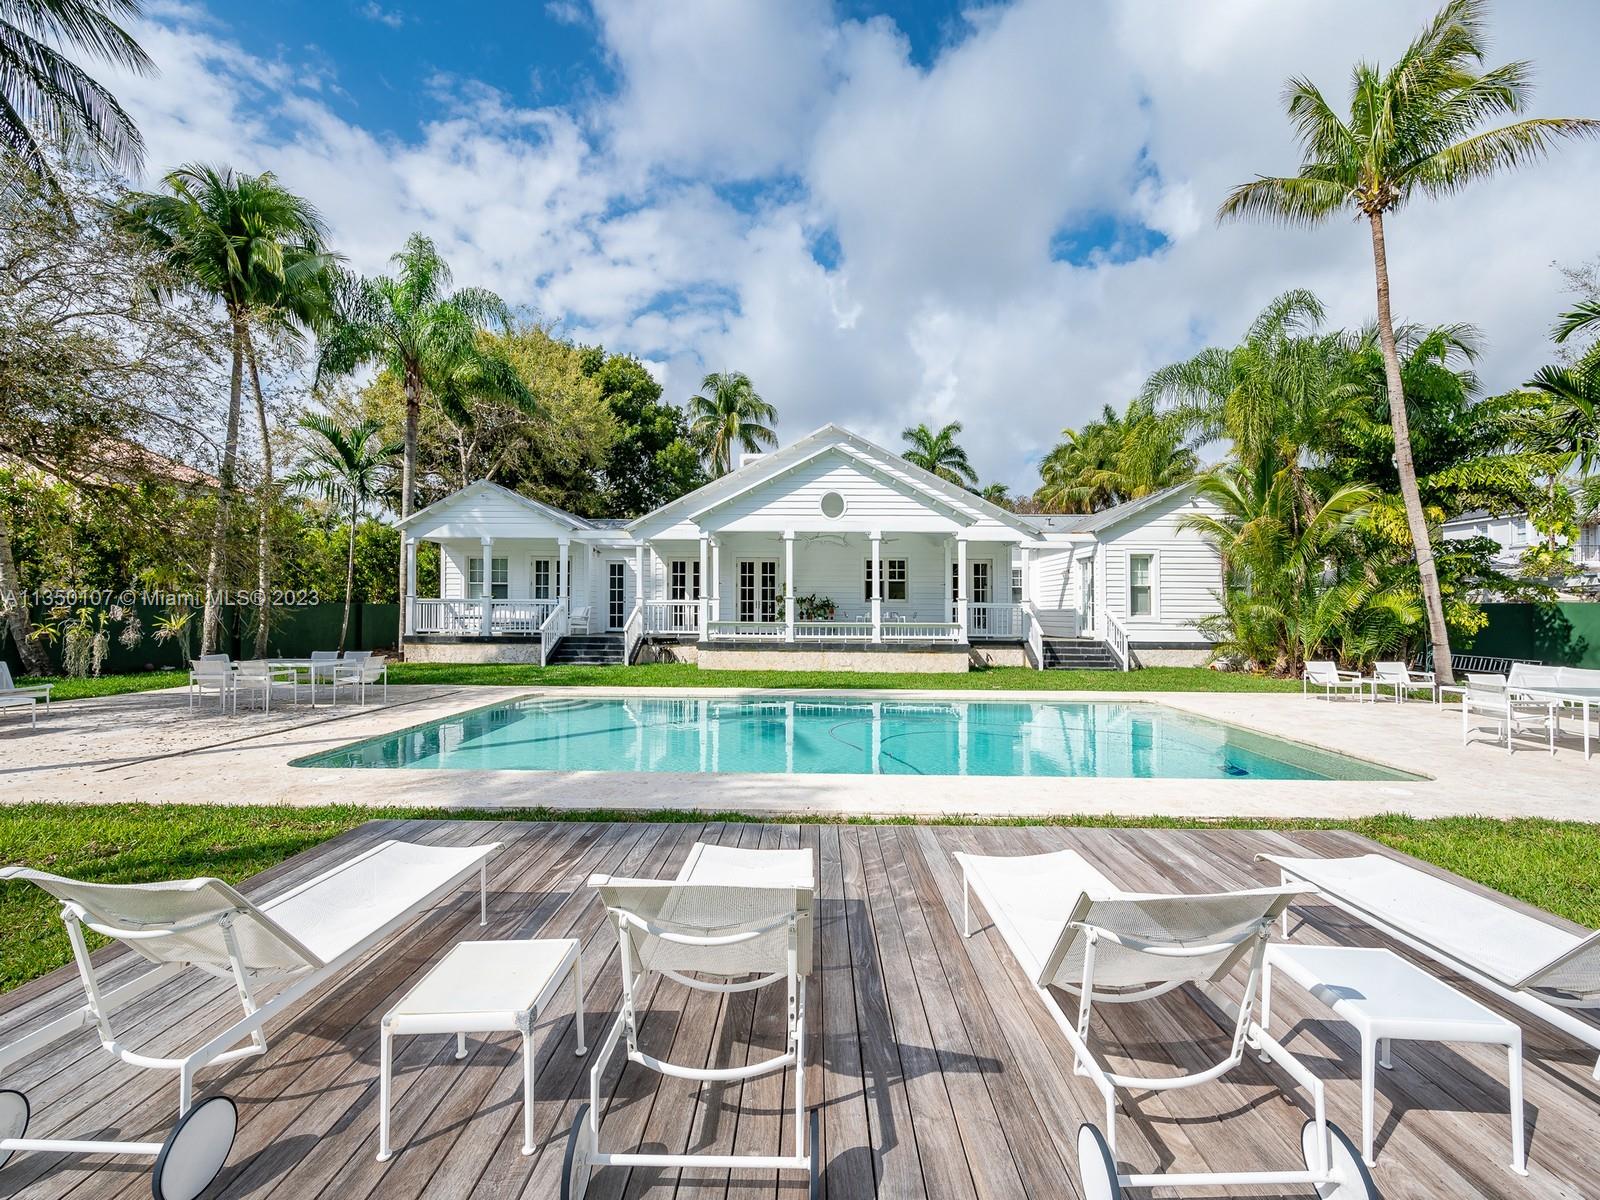 Welcome to this stunning Key West style estate, situated on a sprawling one-acre street to street lot in the desirable Ponce Davis neighborhood. This 7,174 SF Total single-story home boasts 7 bedrooms, 8.5 baths & a 3-car garage. As you enter you'll be greeted by an open floor plan that seamlessly blends the living, dining & family rooms. The gourmet kitchen is complete with top-of-the-line appliances, custom cabinetry & large center island. The primary suite offers a spa-like bathroom & walk in closet. Each of the 4 bedrooms have their own en-suite baths. With an additional service room and office with full bath. The outdoor area is an entertainer's paradise, featuring a covered terrace, and a stunning pool with a cabana bath.